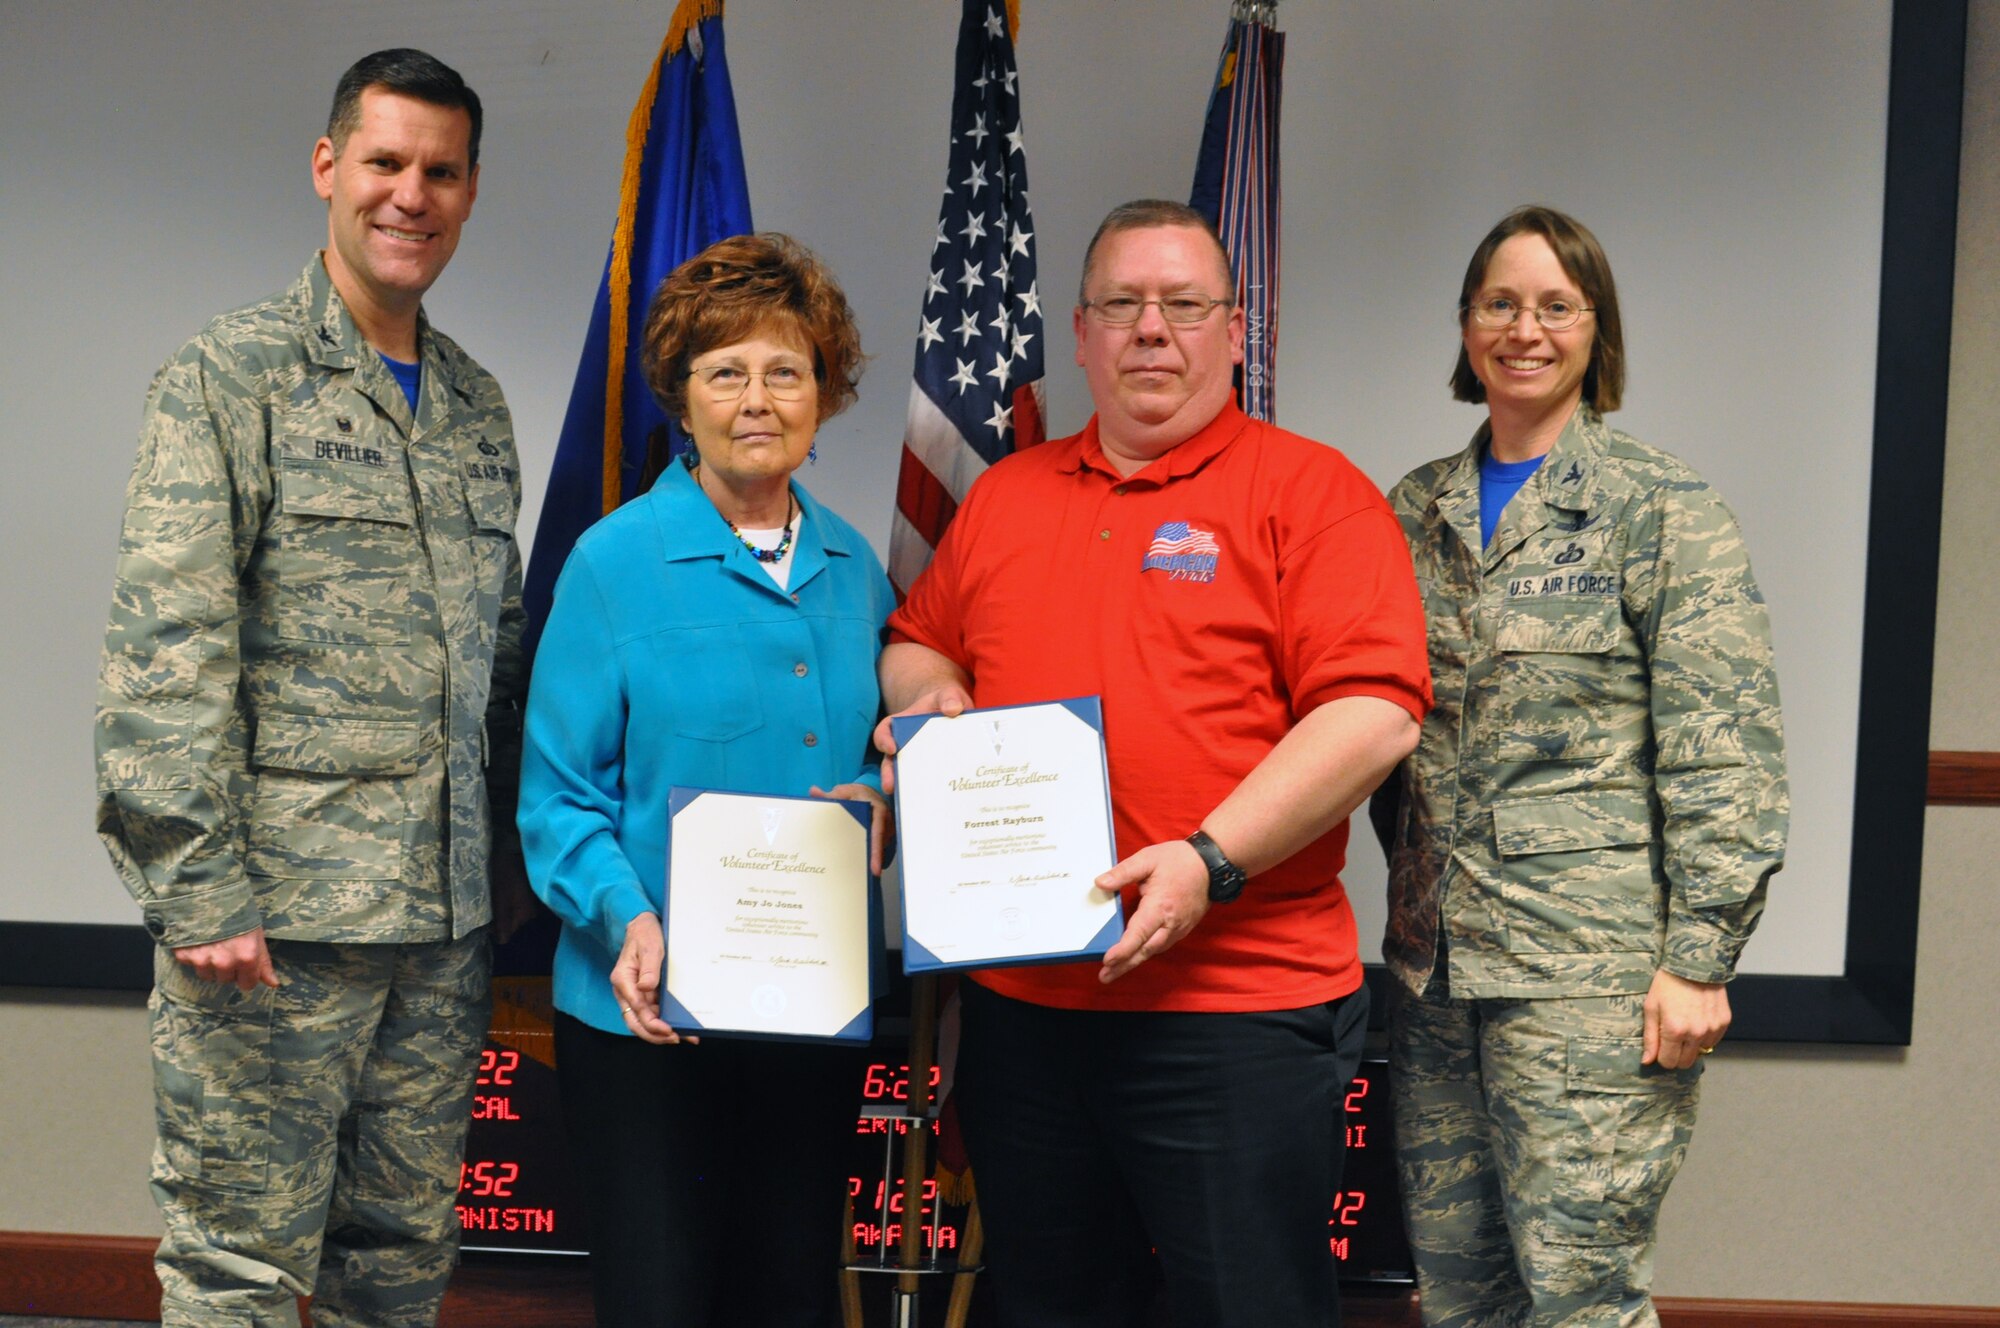 Col. John Devillier, 88th Air Base Wing commander, left, and Col. Elena Oberg, 88th Air Base Wing vice commander, right, recognize Amy Jo Jones and Forrest Rayburn as recipients of the Wright-Patterson Air Force Base Volunteer Excellence Award April 15 at the annual volunteer recognition ceremony. (U.S. Air Force photo/Jim Mitchell) 